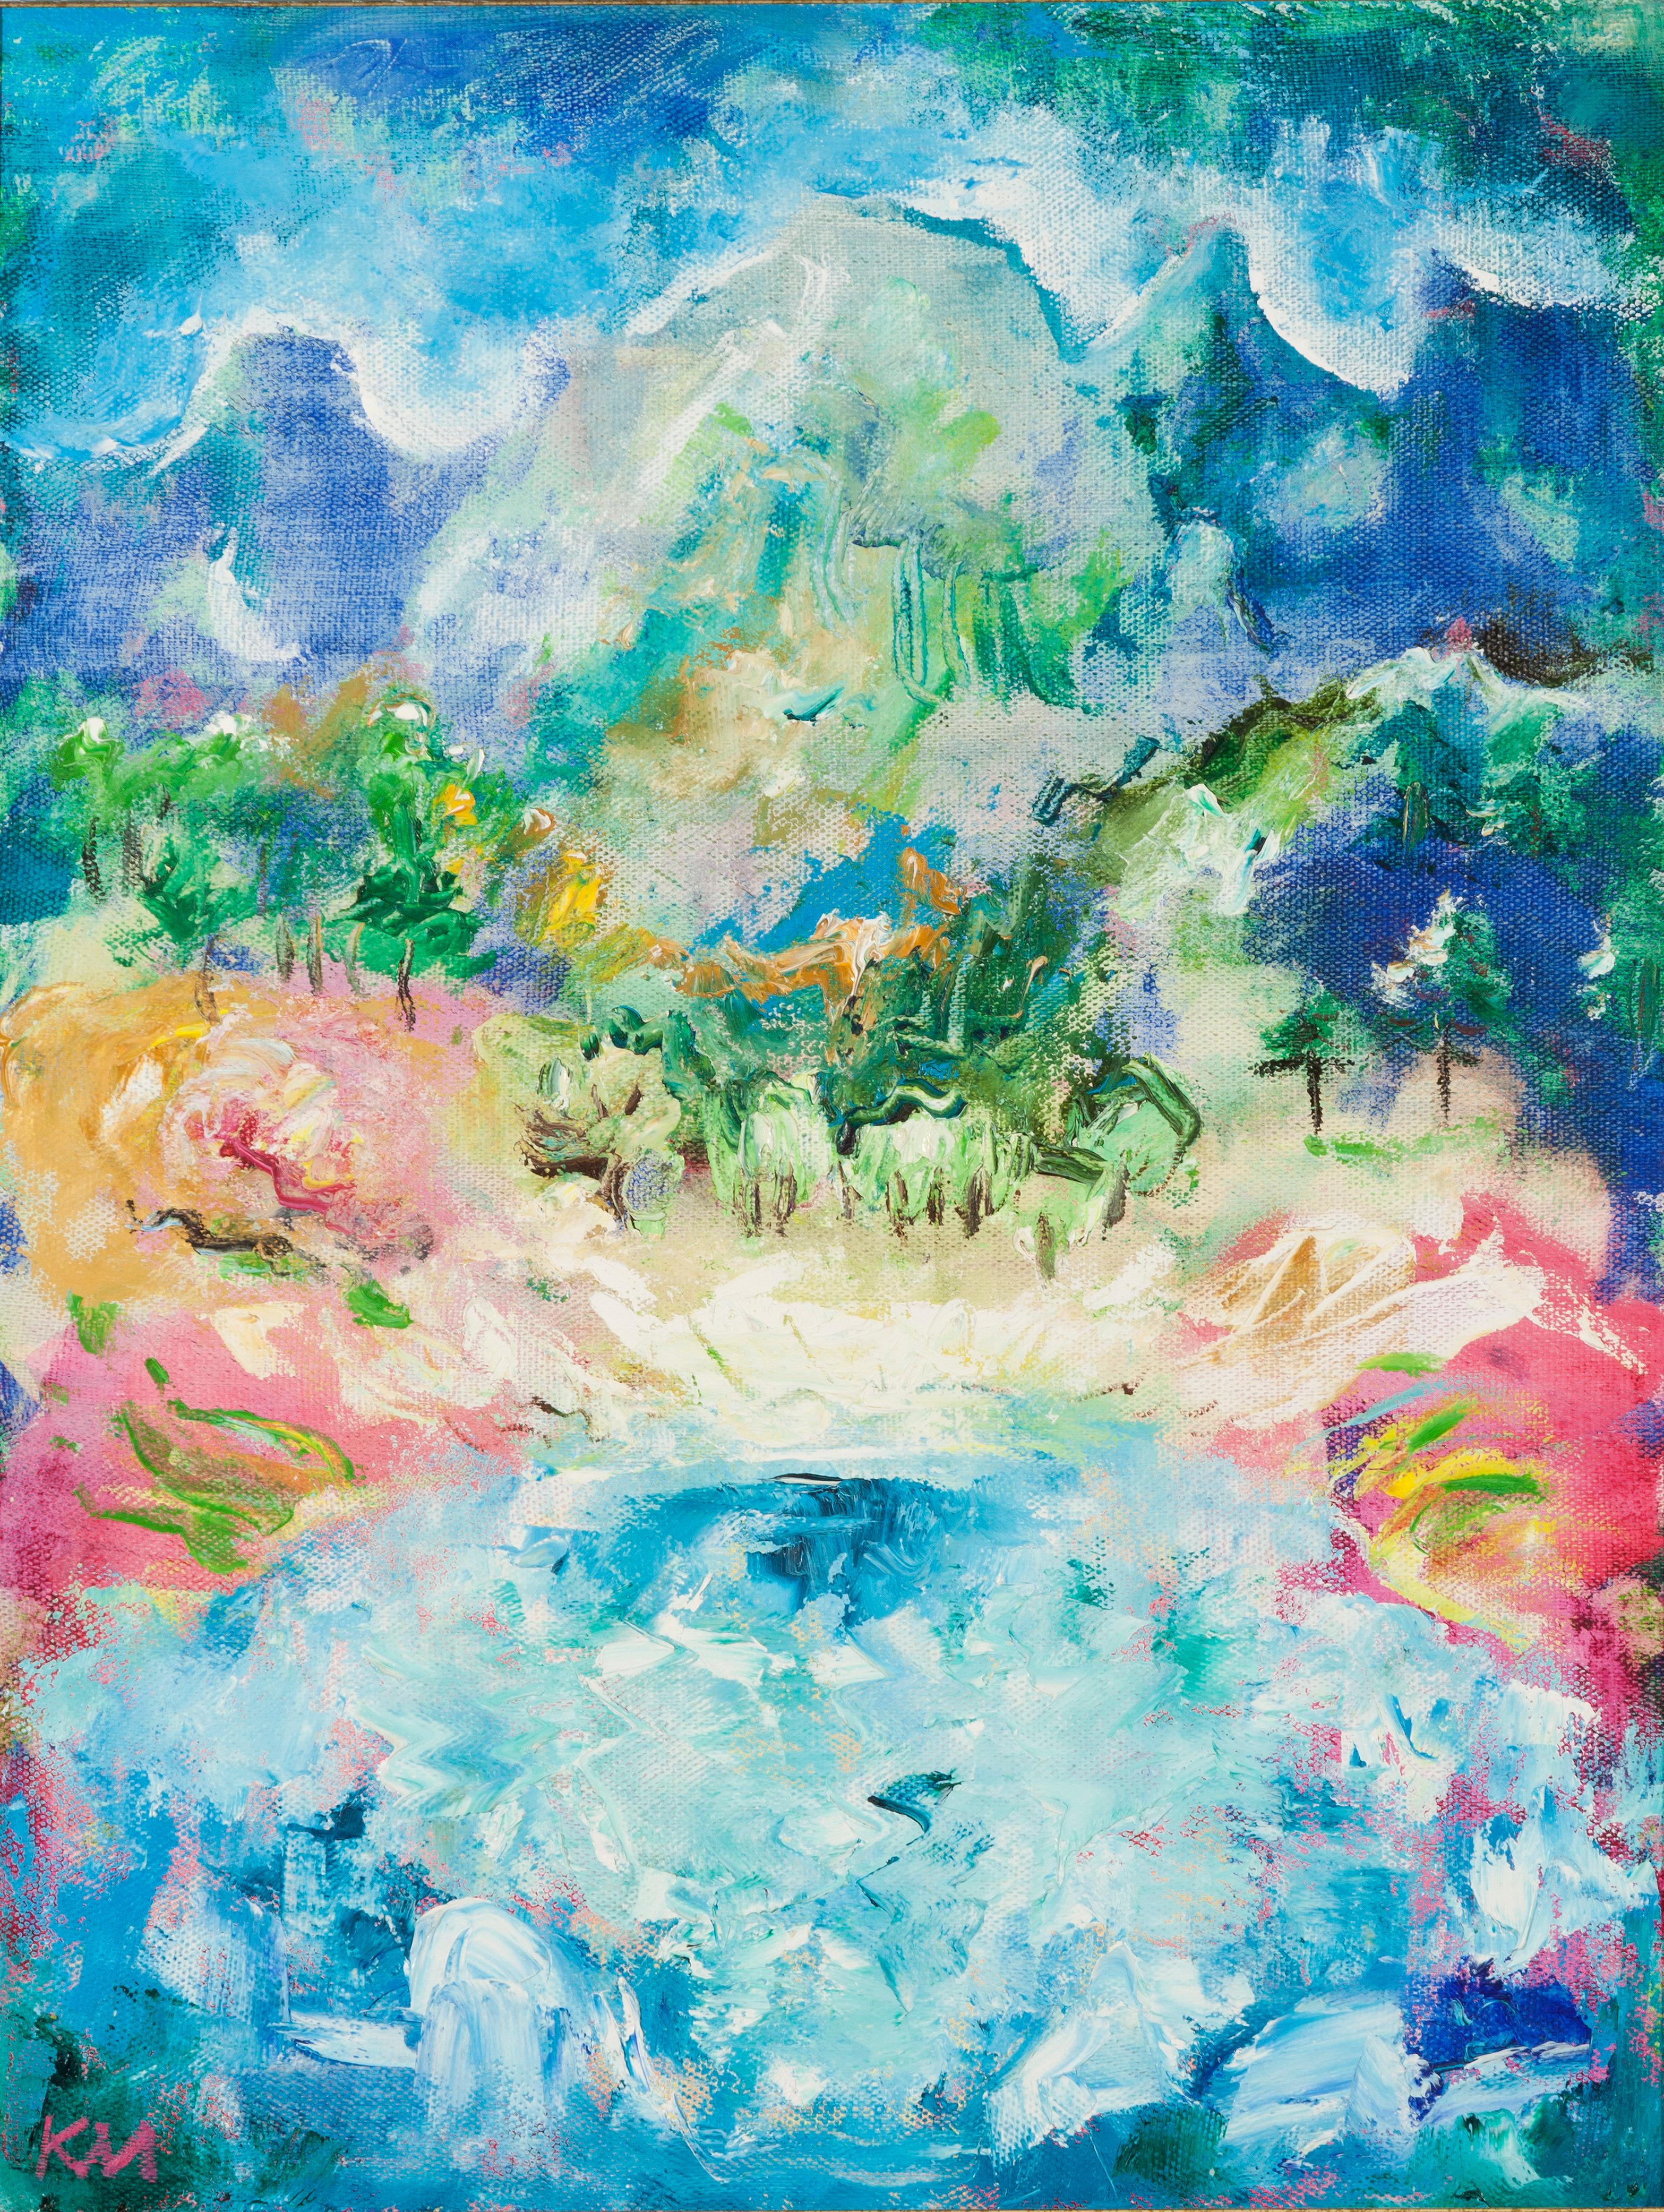 "Mountain Lake. Impression" is an impressionist painting by Maestro Krassimira Mihaylova.

About the artwork:

TECHNIQUE:  oil painting
STYLE: Impressionist, Contemporary
Edition: Unique, signed
Weight: Approximately 2 kg.

The painting is